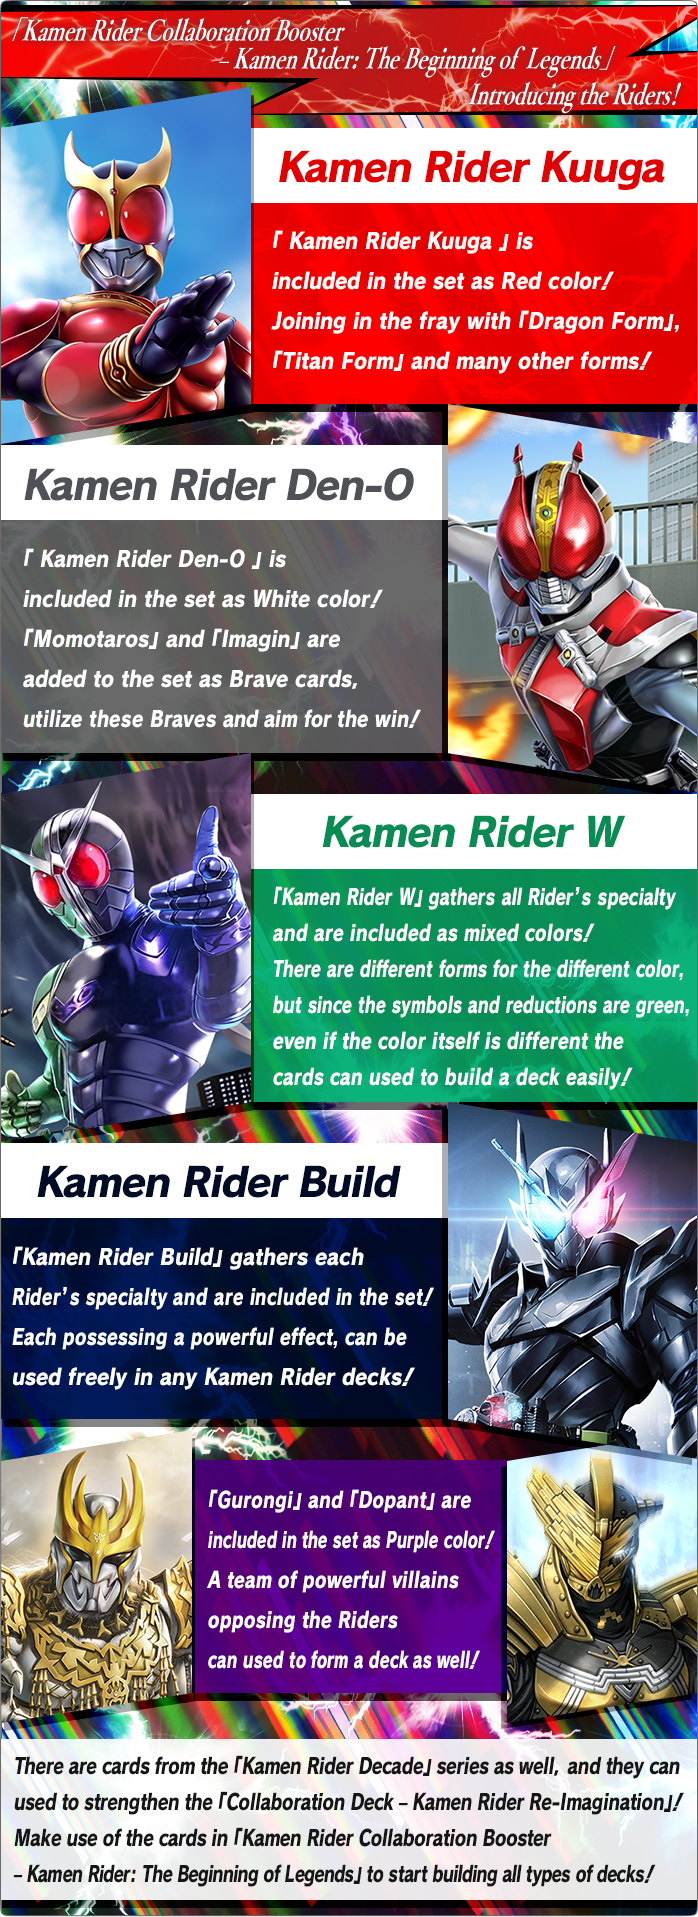 Introducing the Riders!